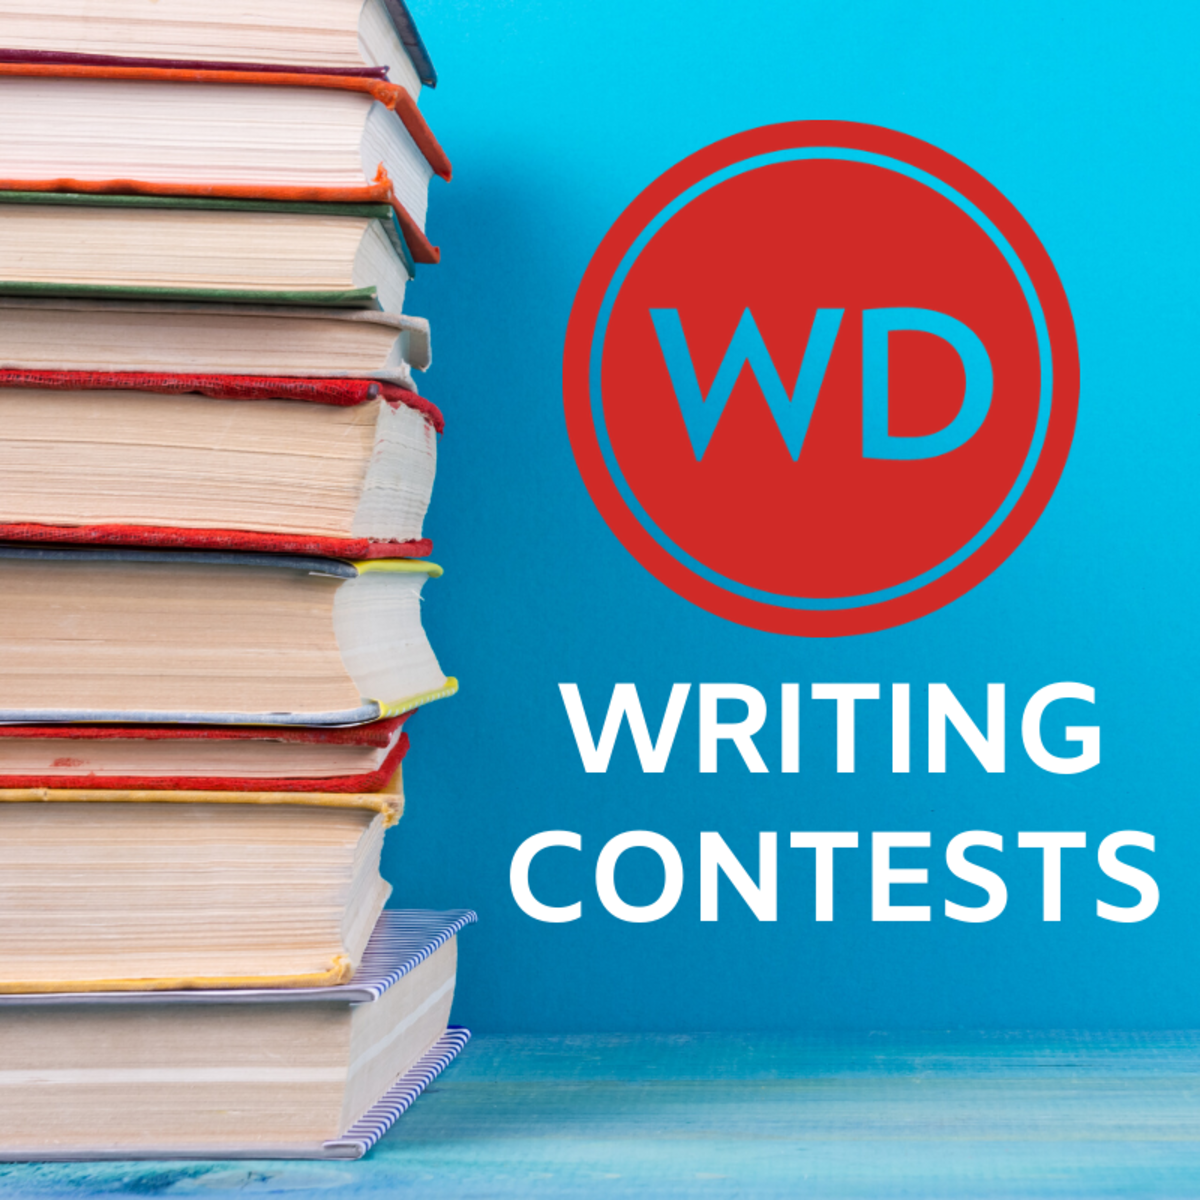 WRITING CONTESTS